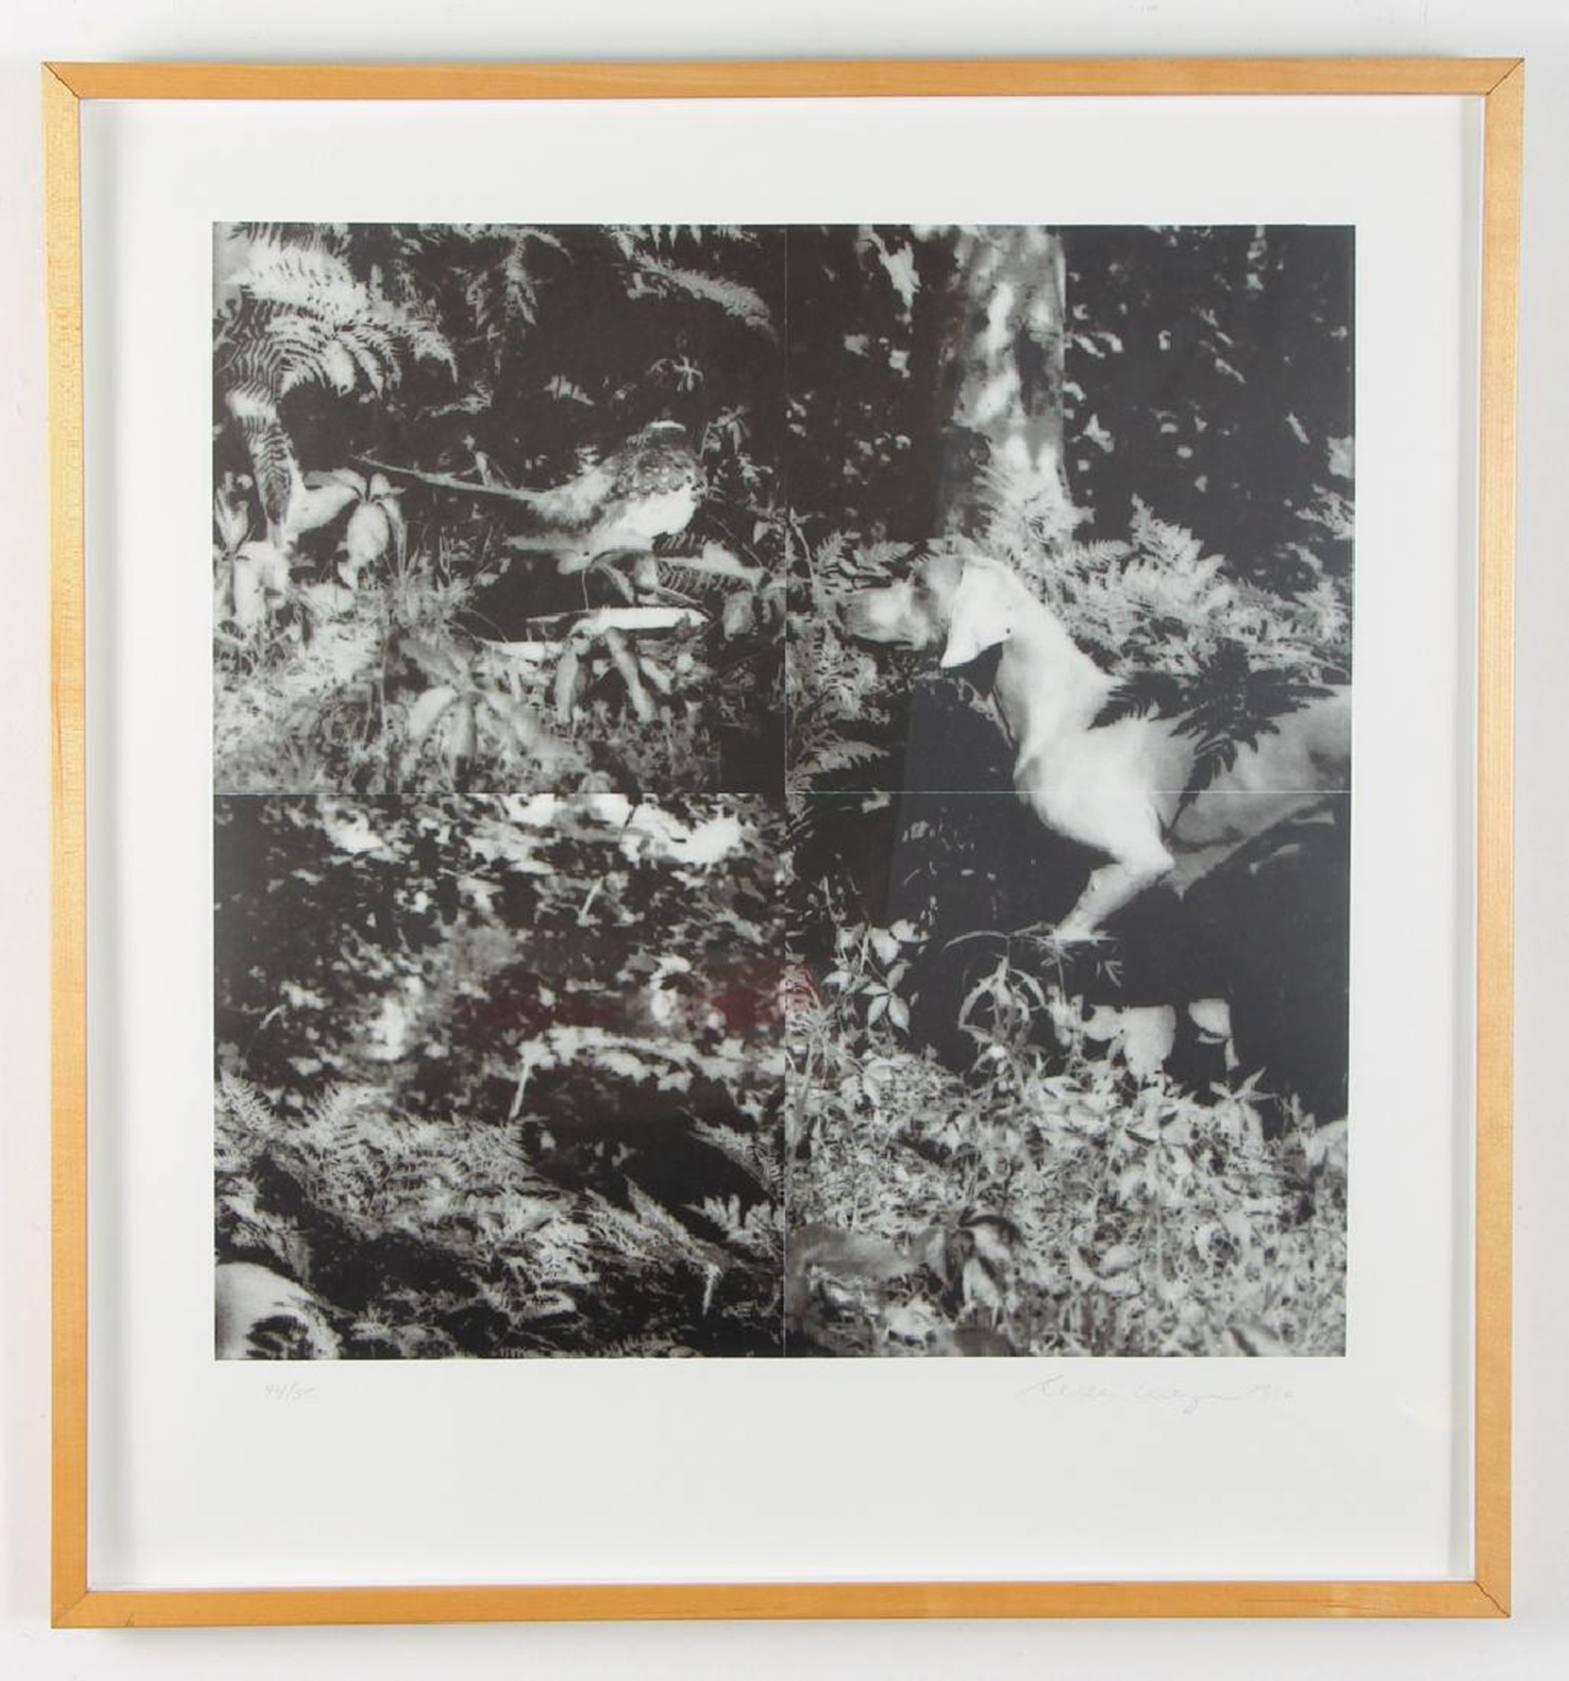 Artist: William Wegman (American, b. 1943)
Title: Bird Dog Suite, 1990
Medium: 4 photolithographs
Dimensions: 19.5 x 19.5 inches (image), (4 pieces)
Publisher: Segura Publishing Company

Signed WW 90 and inscribed 44/50 lower right. 
Provenance: A